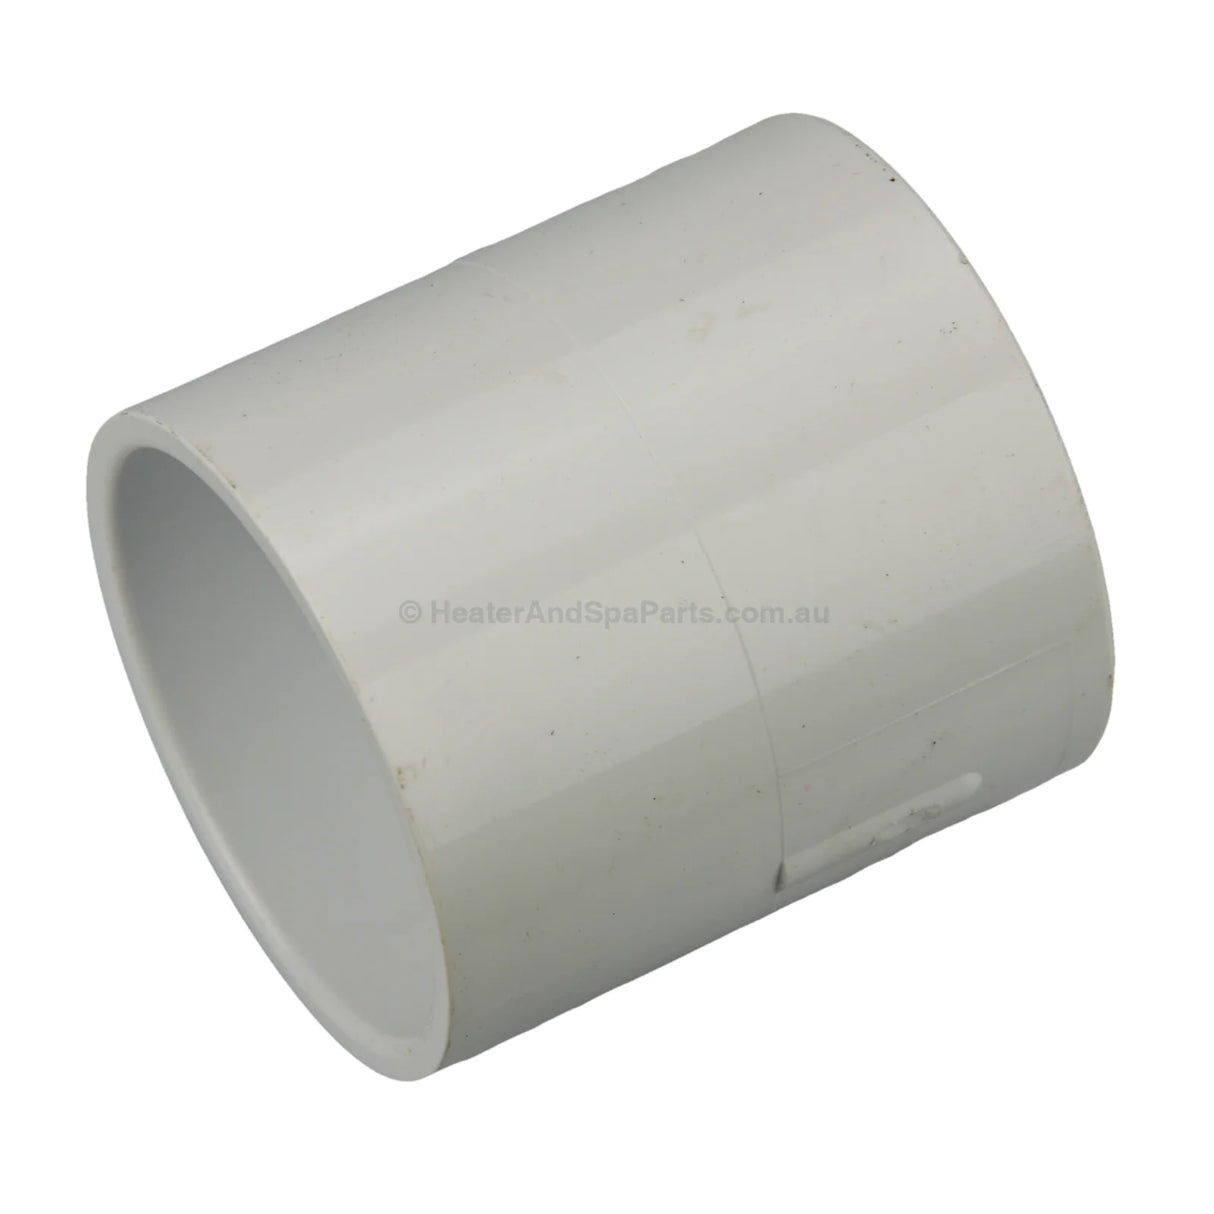 20mm 3/4" PVC Coupling Joiner - Heater and Spa Parts